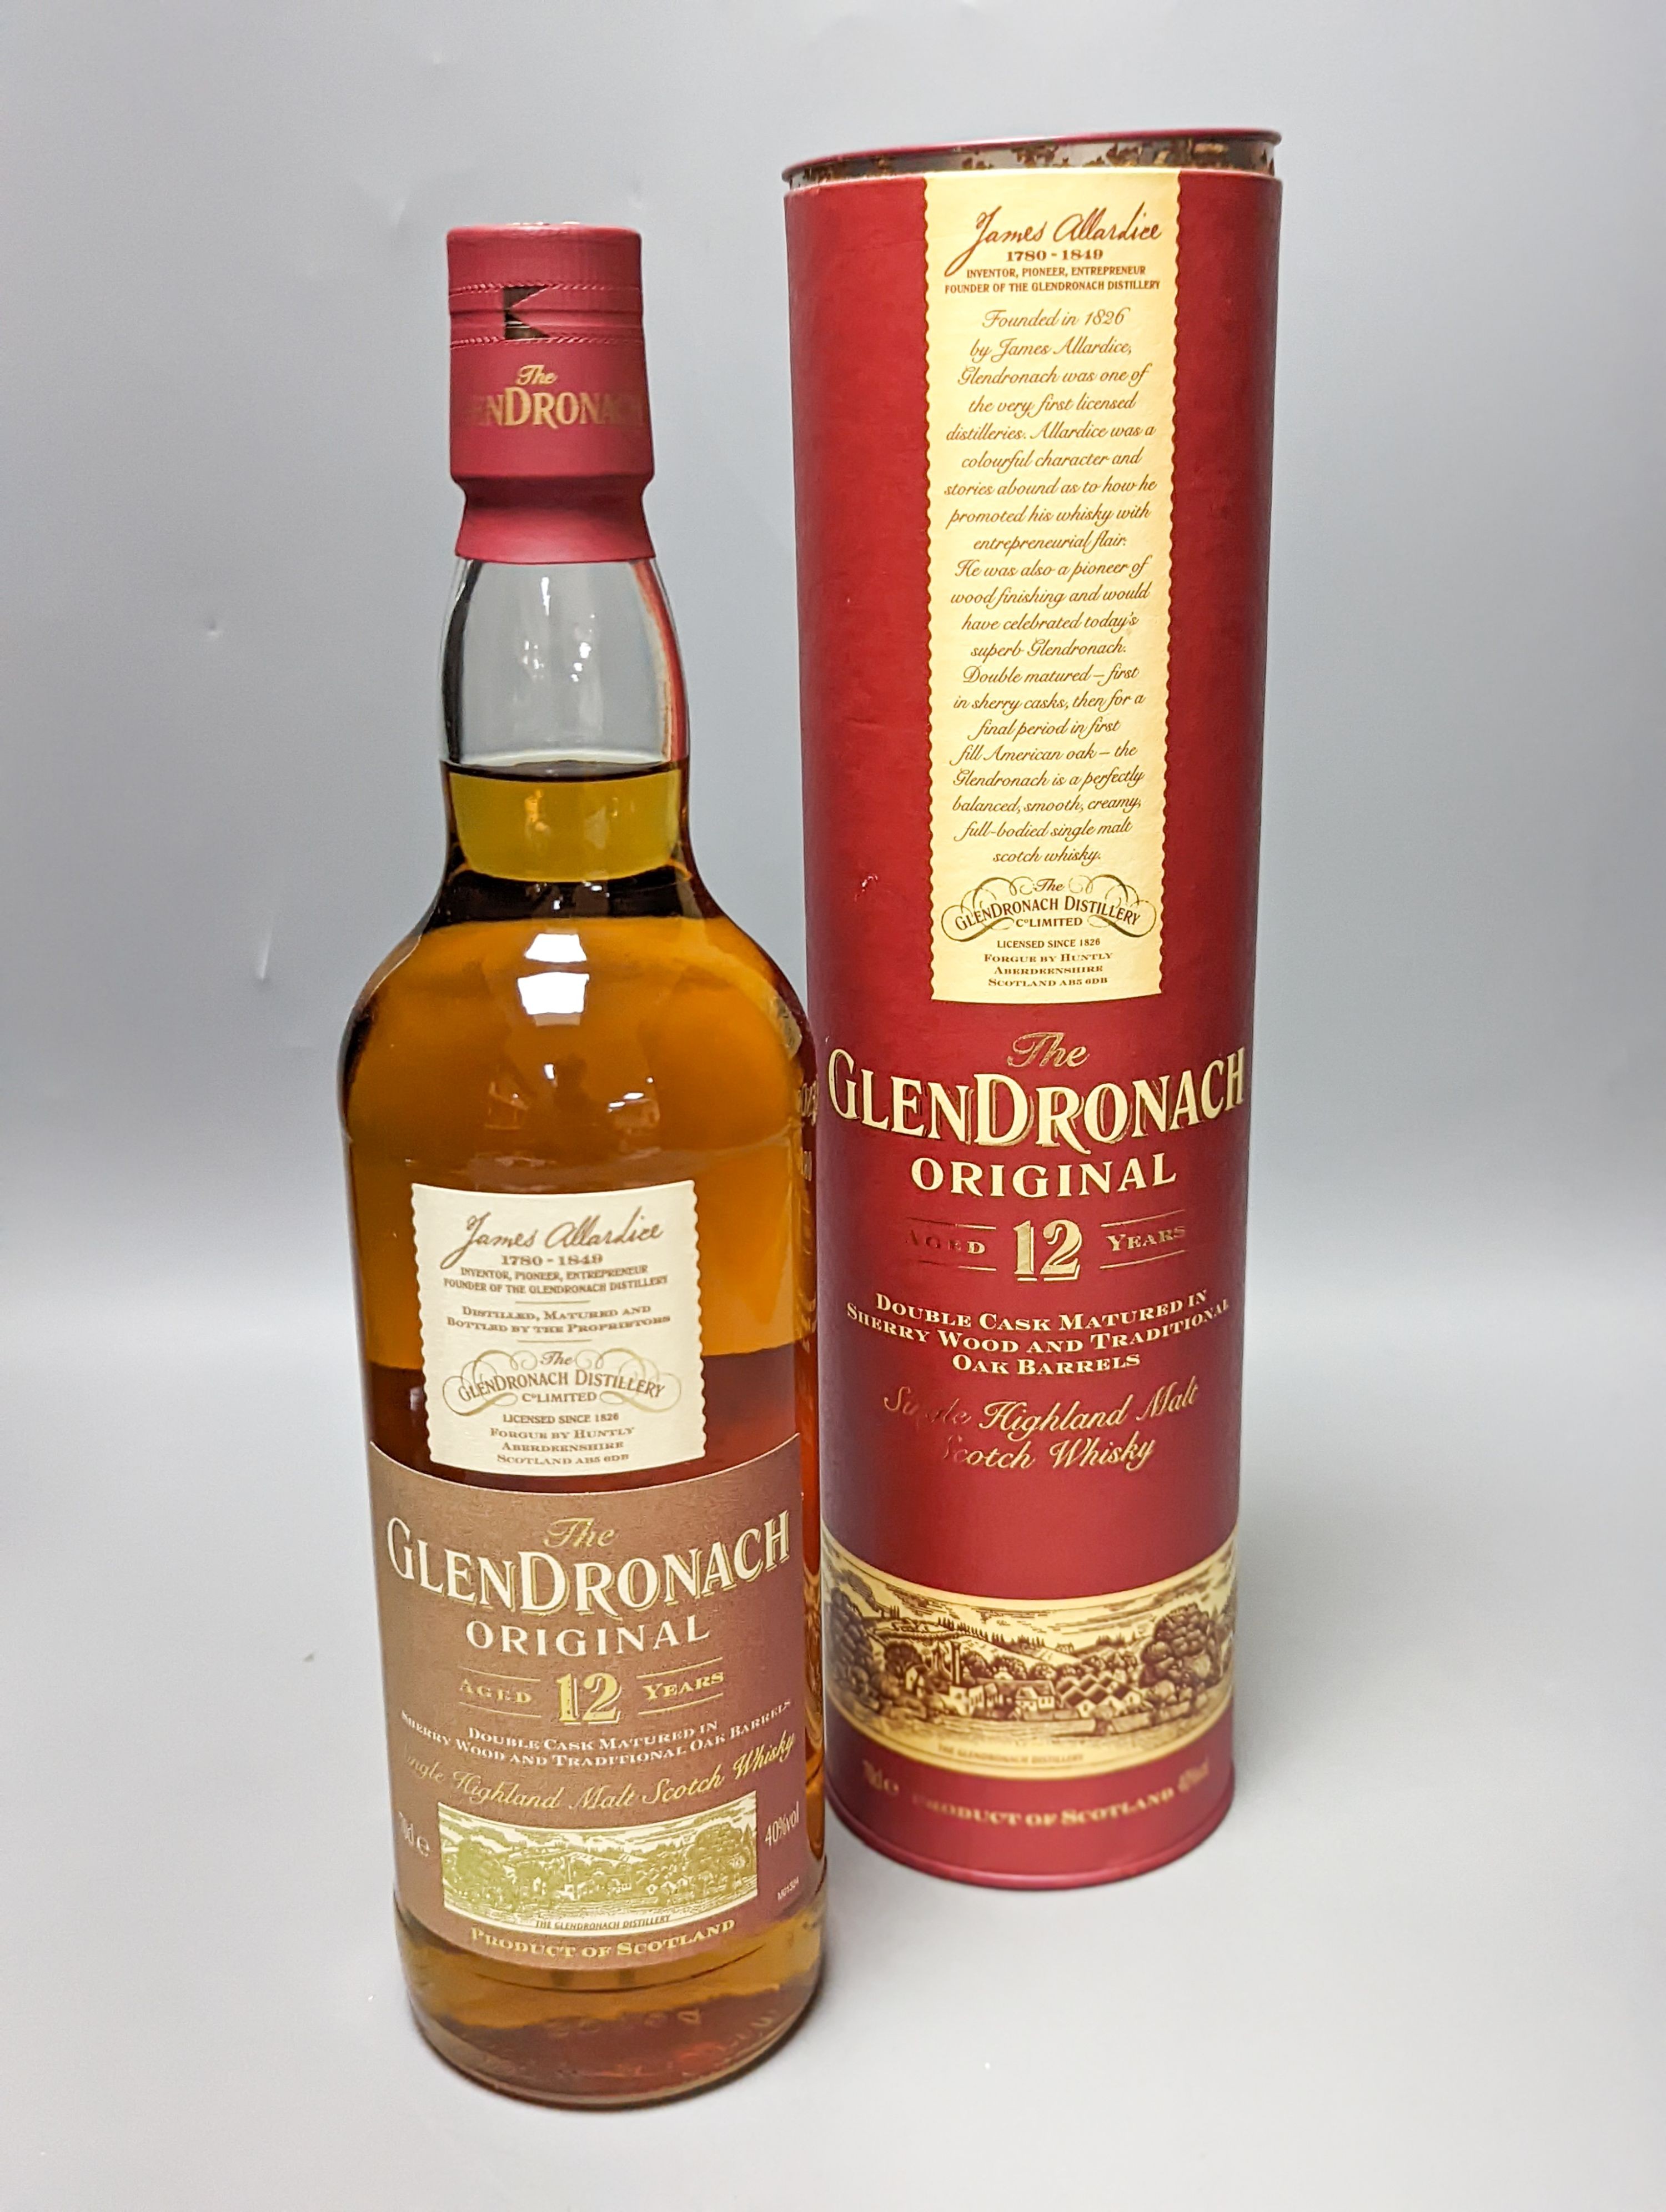 Four assorted bottle of single malt whisky including The Dalmore 12 years old, The Glendronach Original aged 12 years, Cardhu aged 12 years and The Glenrothes distilled in 1989, three boxed.